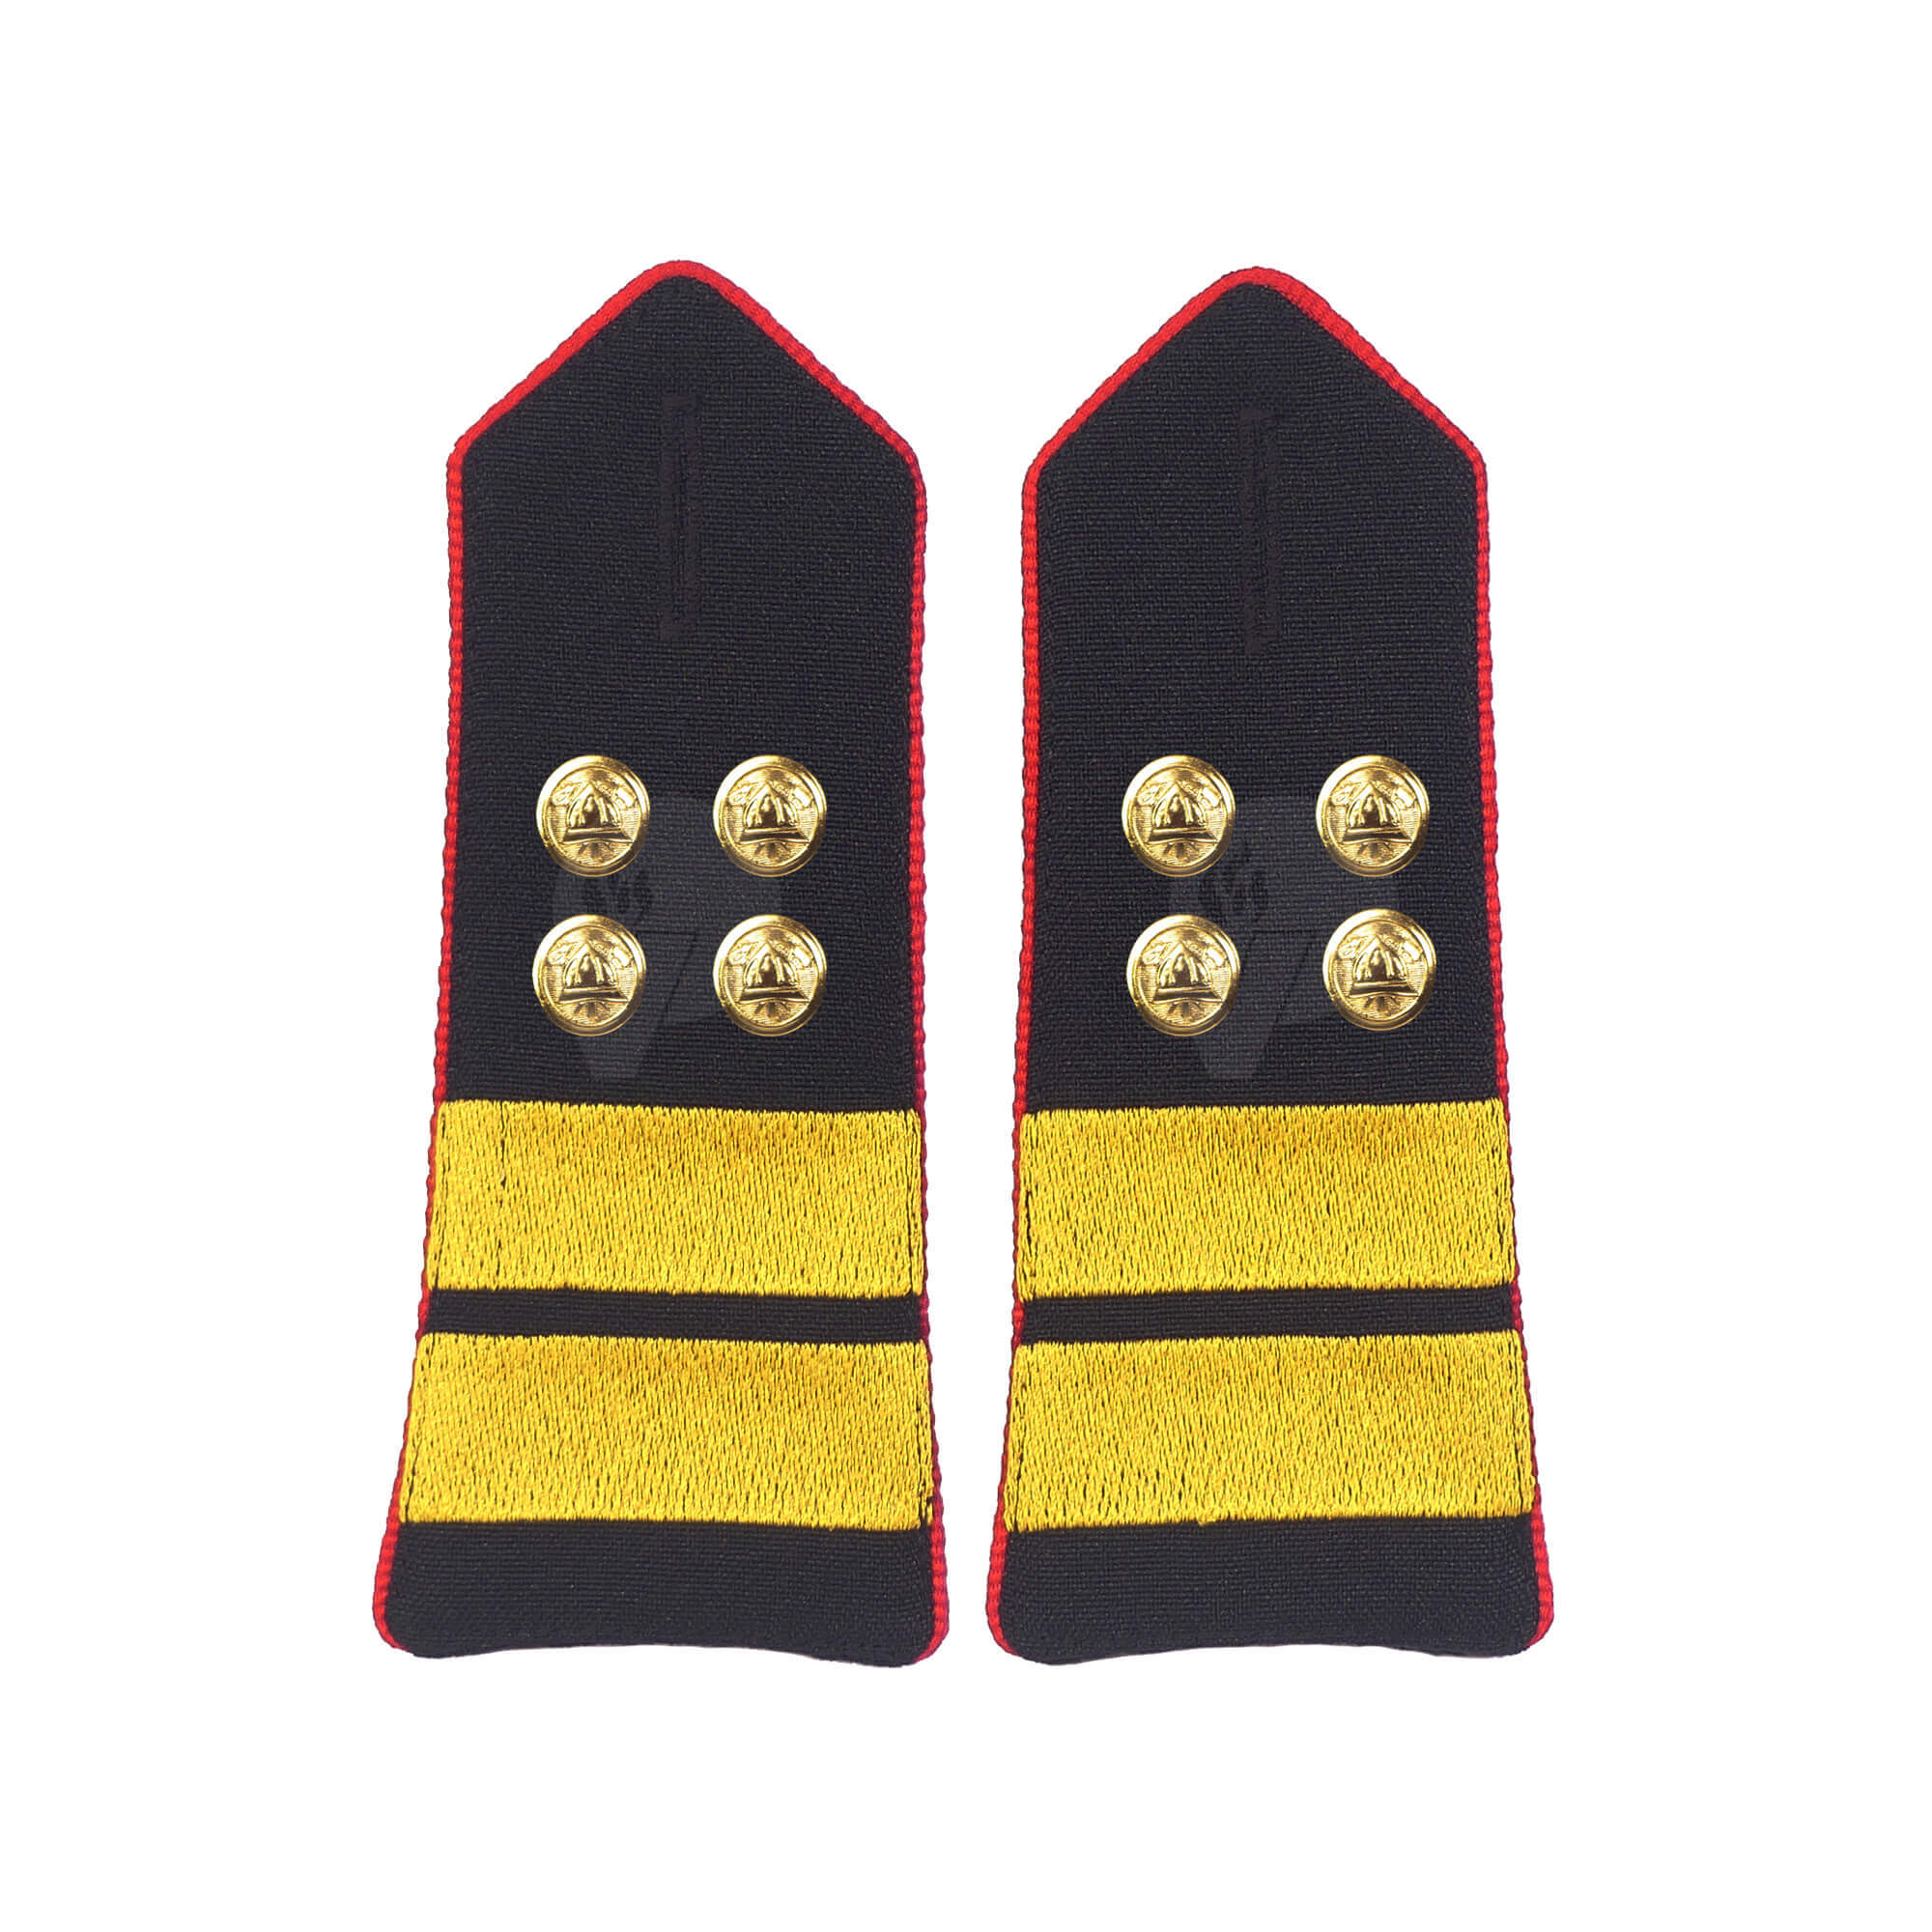 Firefighter Rank Marks, Chief Fire Officer